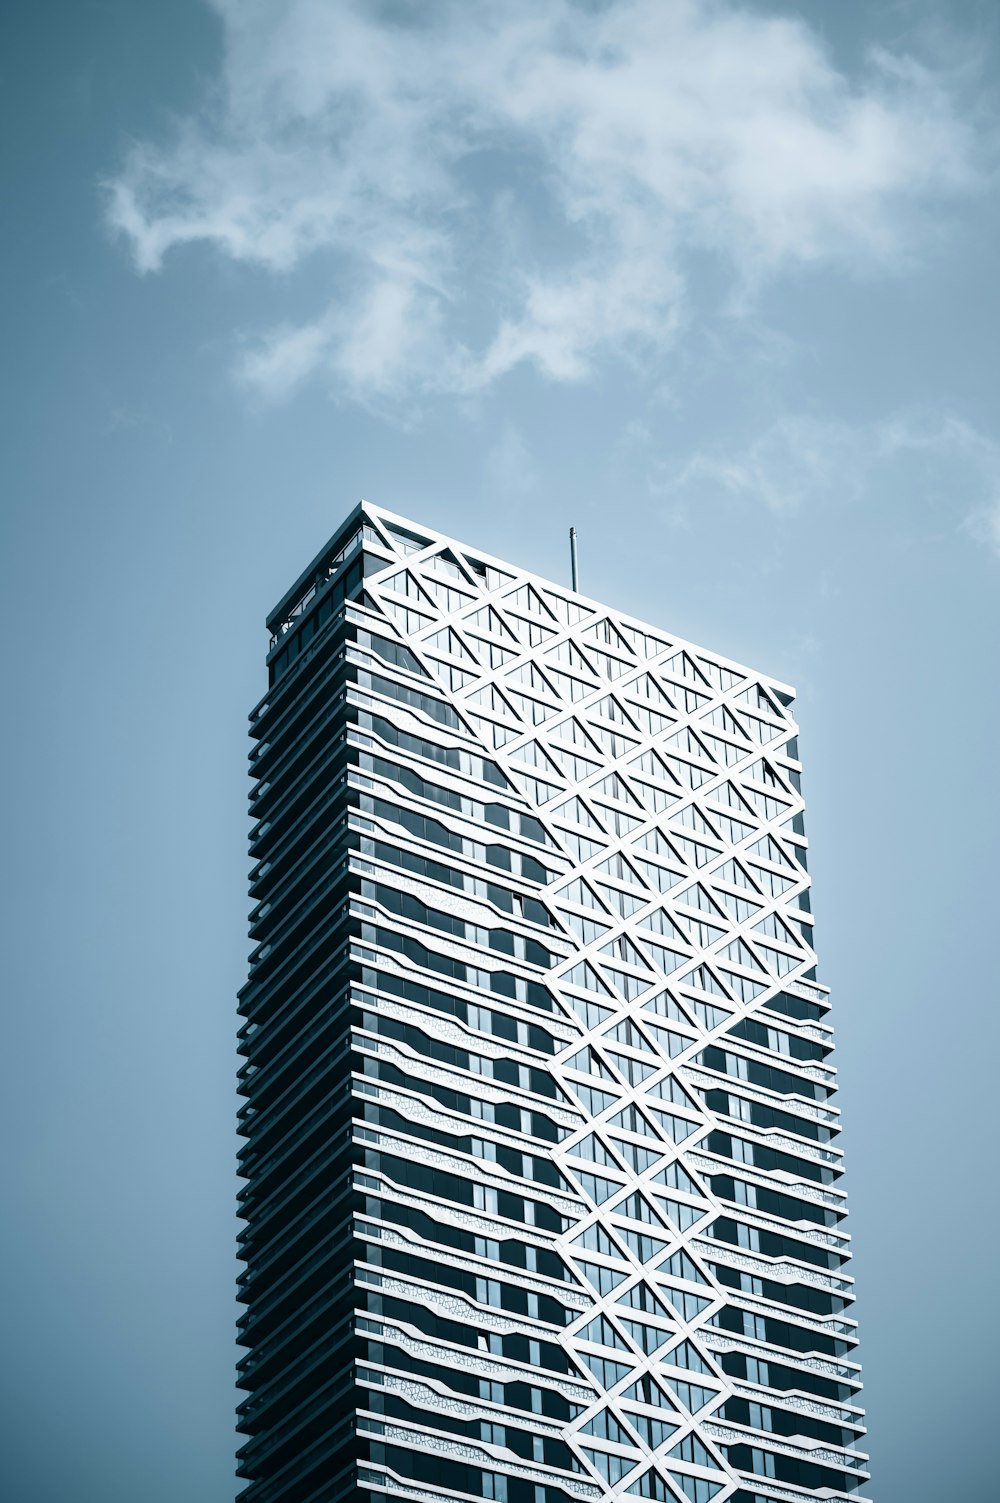 white and black building under blue sky during daytime